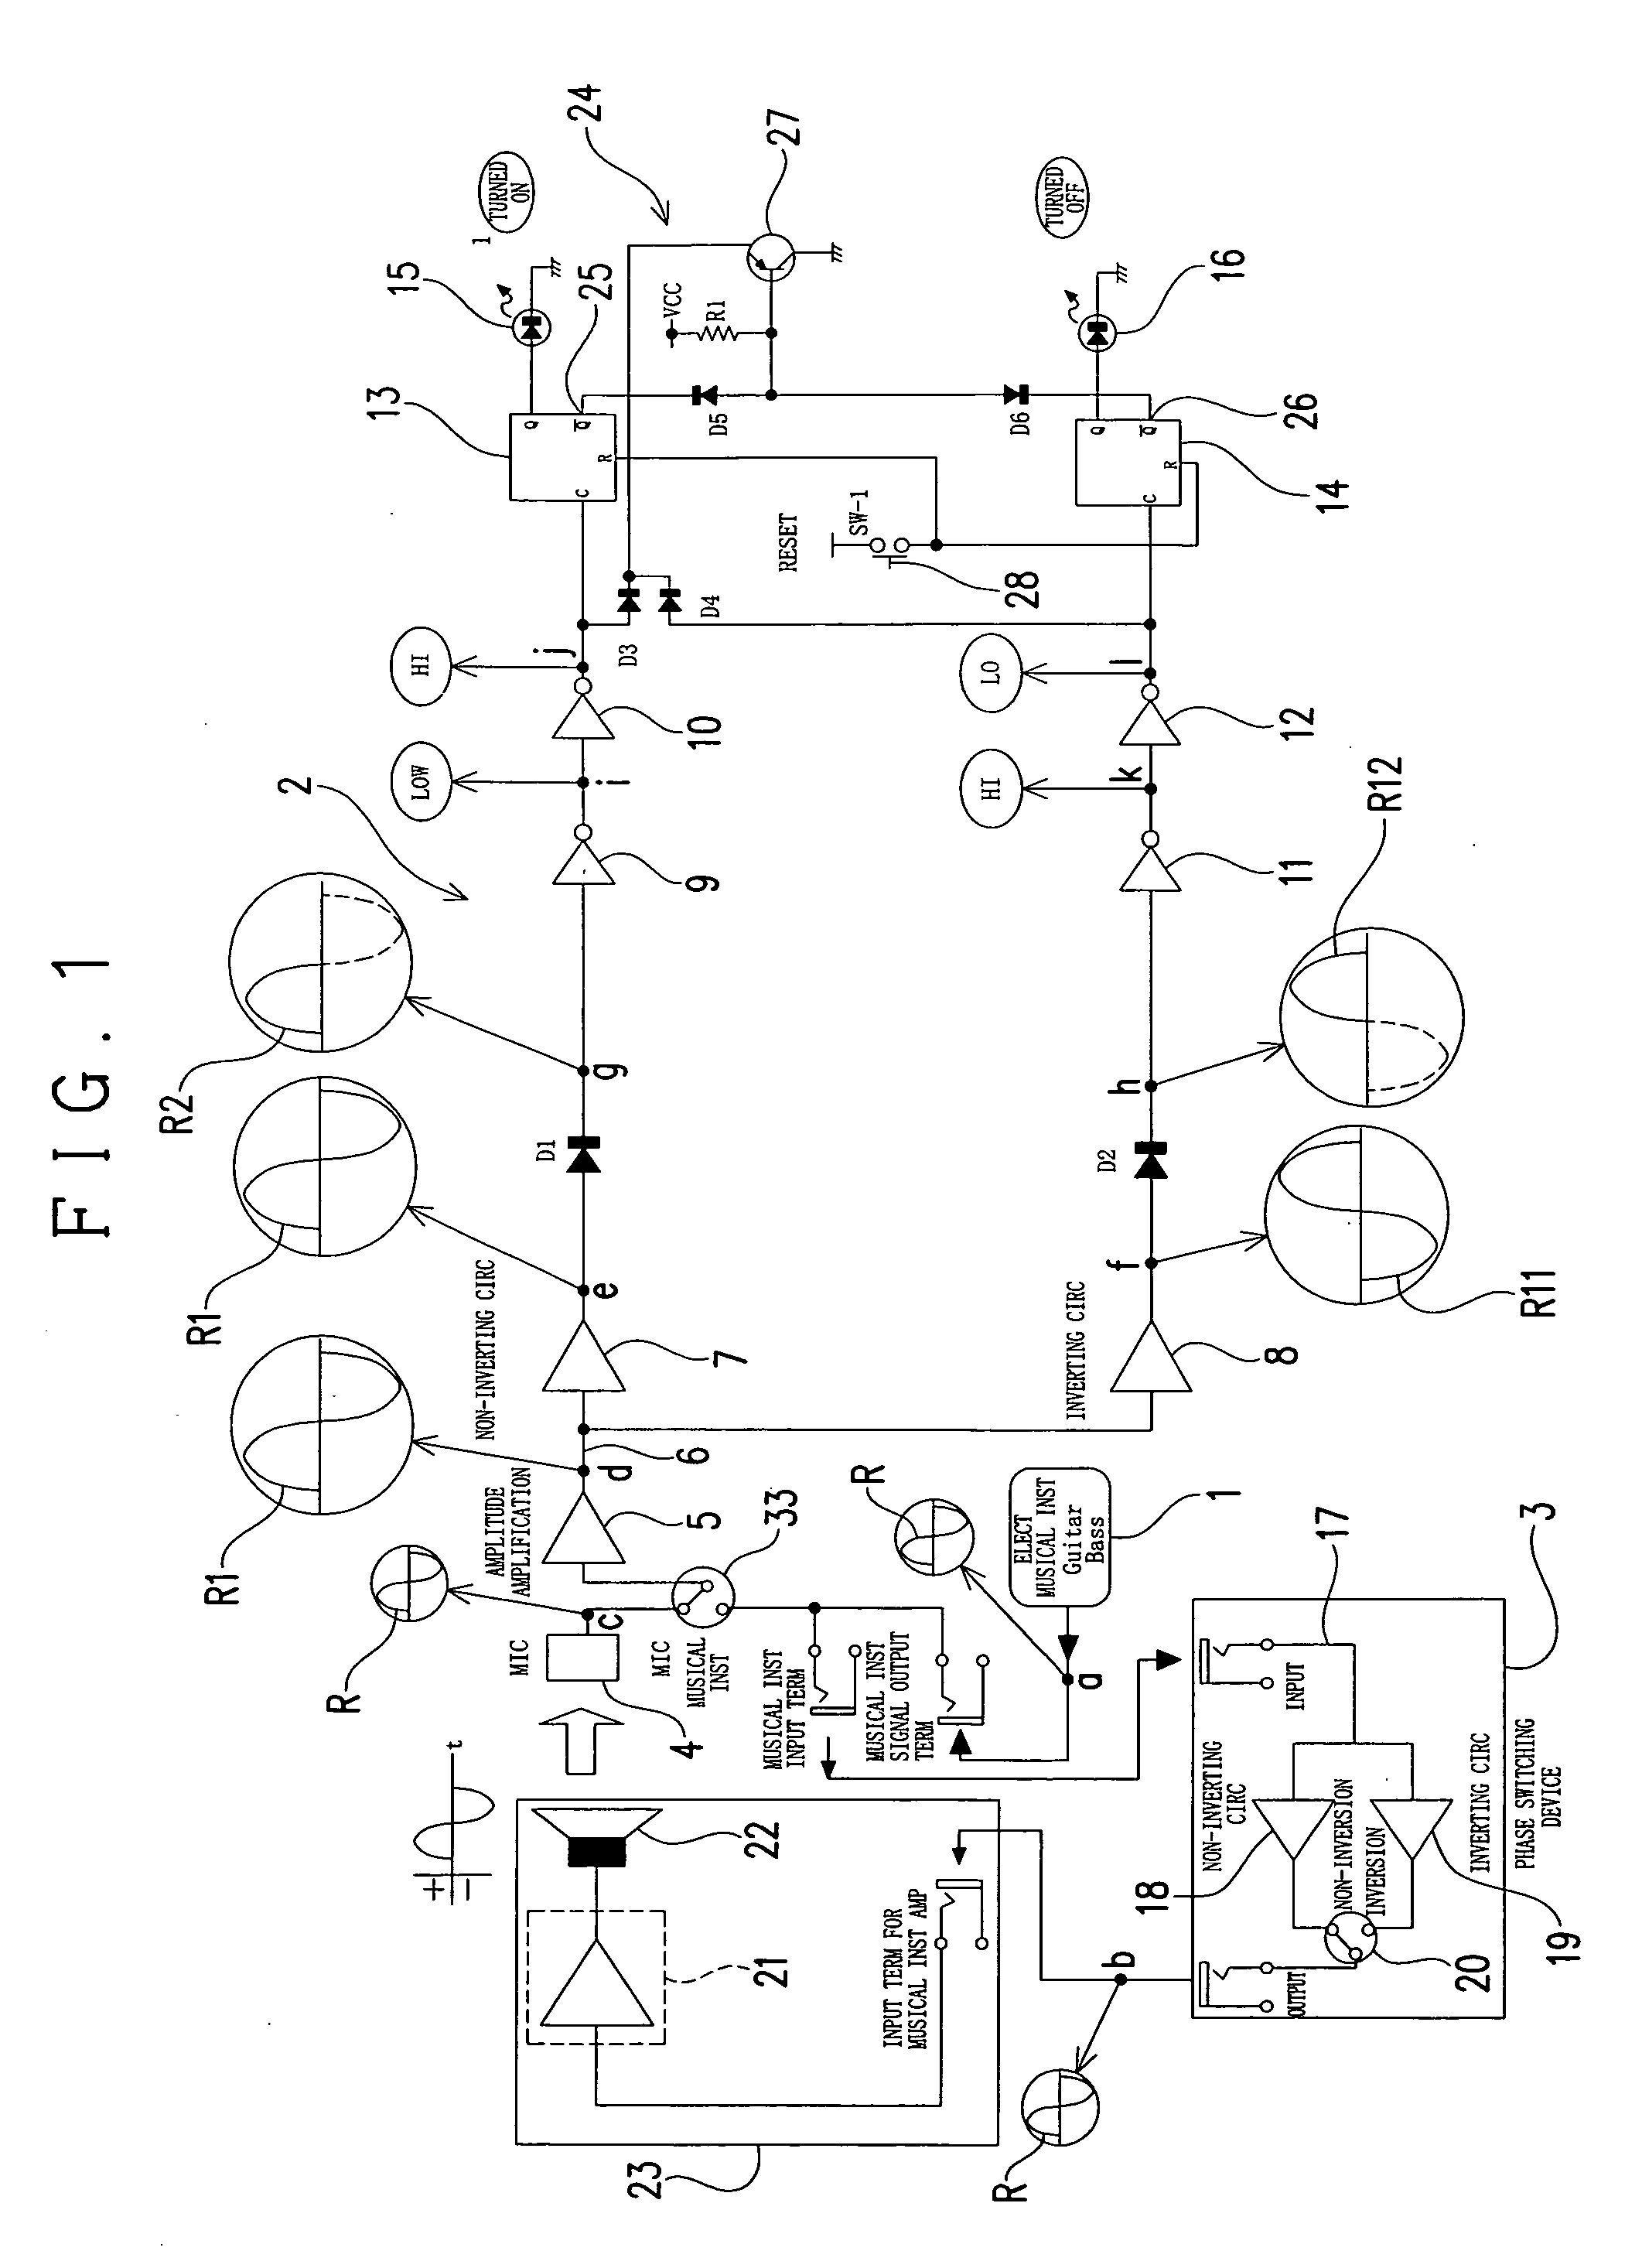 Phase shifting device in electronic musical instrument